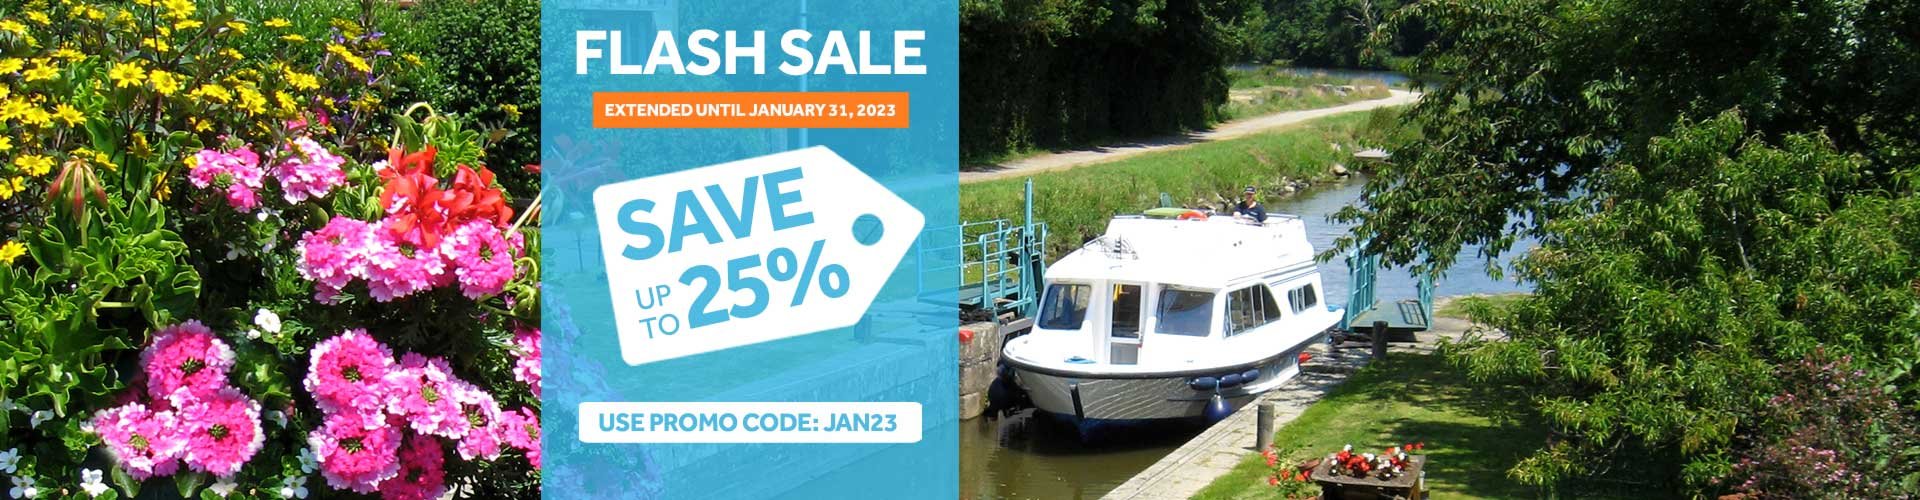 Flash Sale - Extended until Jan. 31, 2023 - Save up to 25% on 2023 boating vacations offer banner